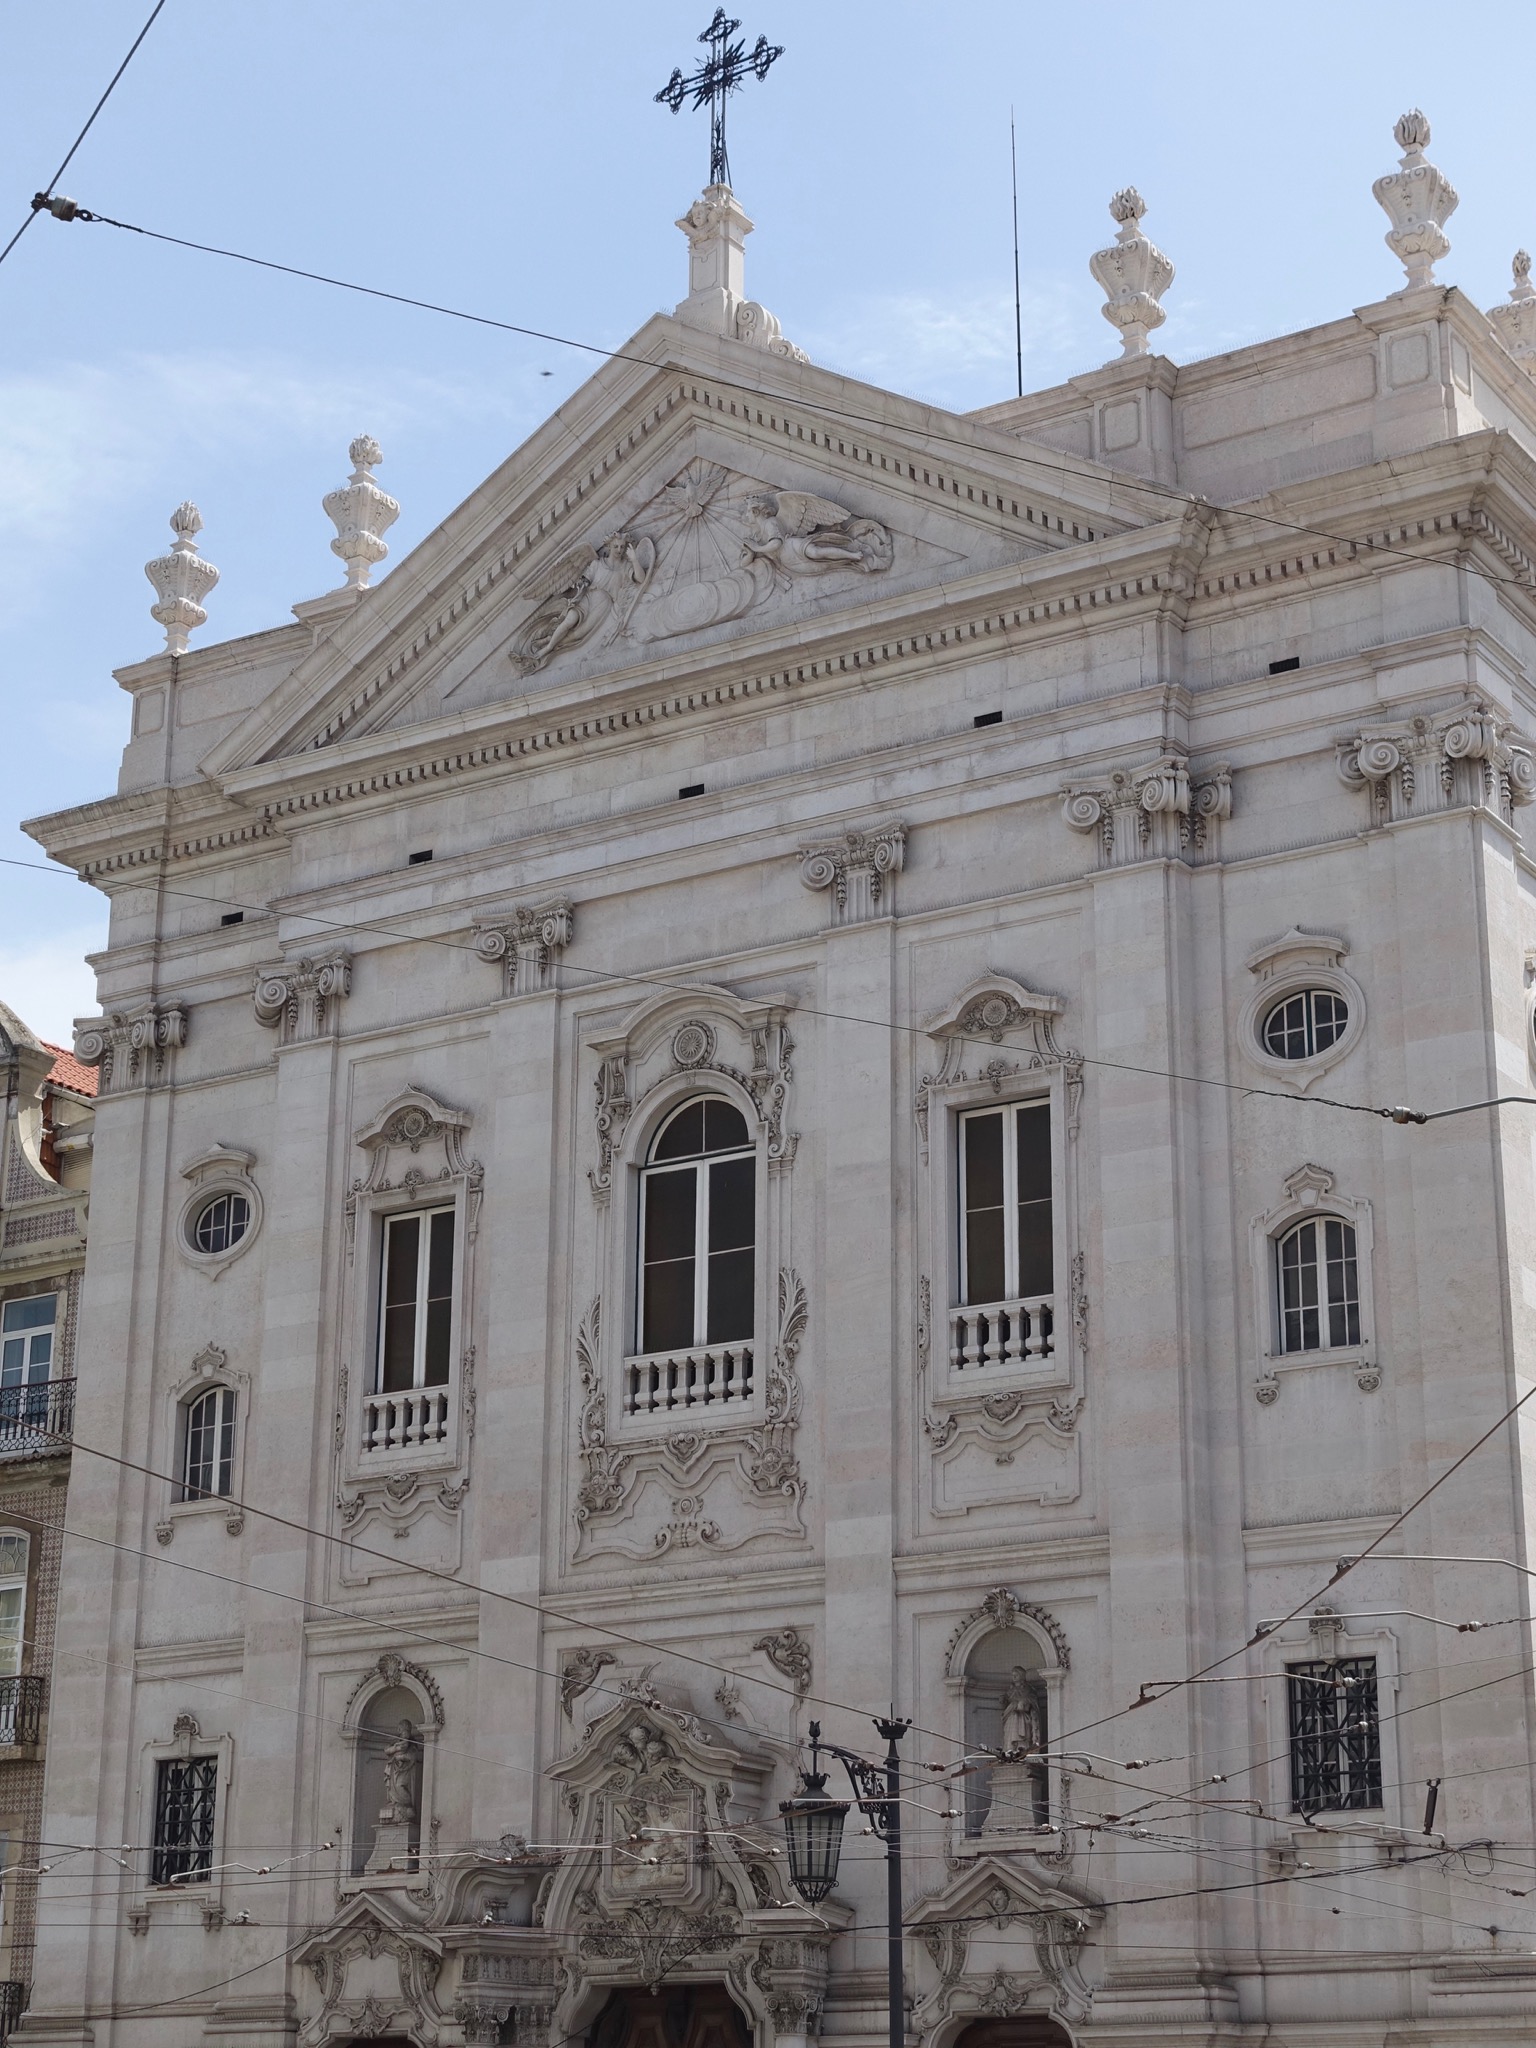 Photo 67 of 86 from the album Highlights Lisbon 2015.